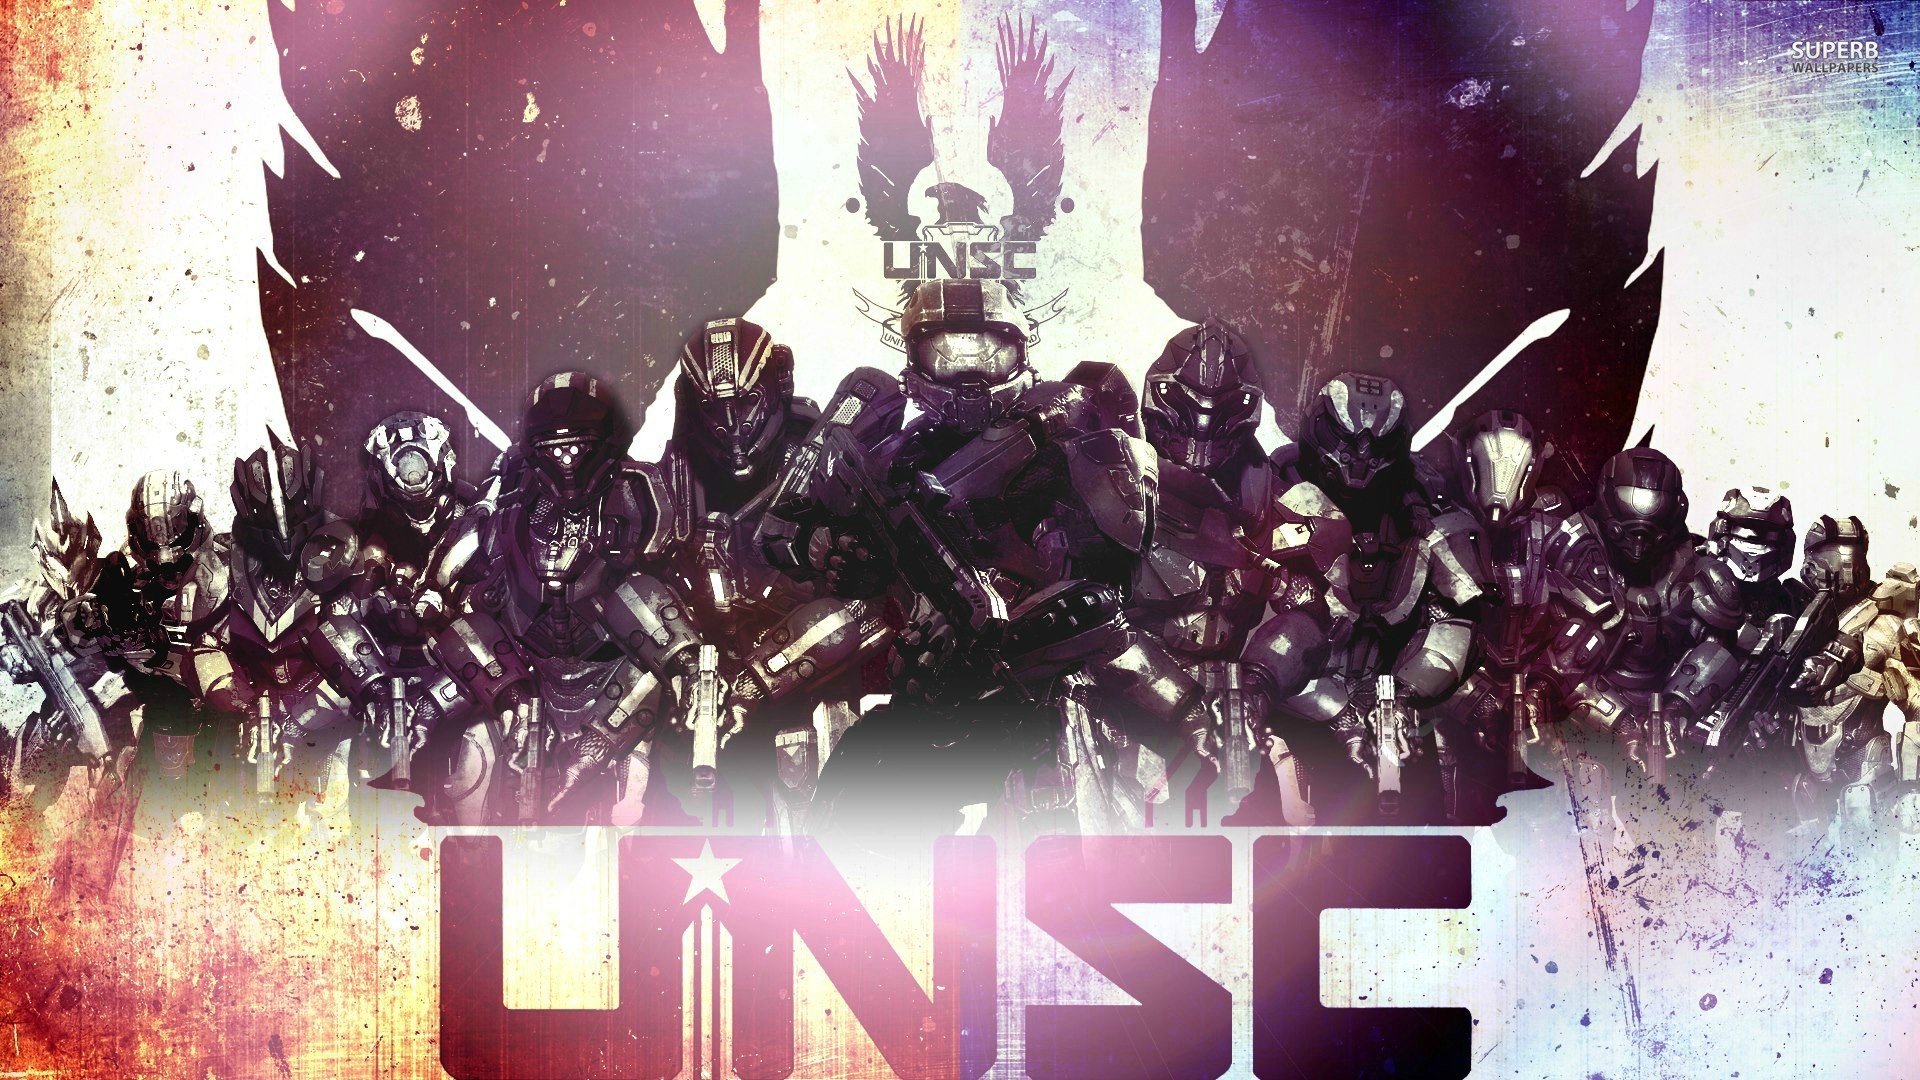 video Games, UNSC Infinity, Halo, Halo 4, 343 Industries, Spartans